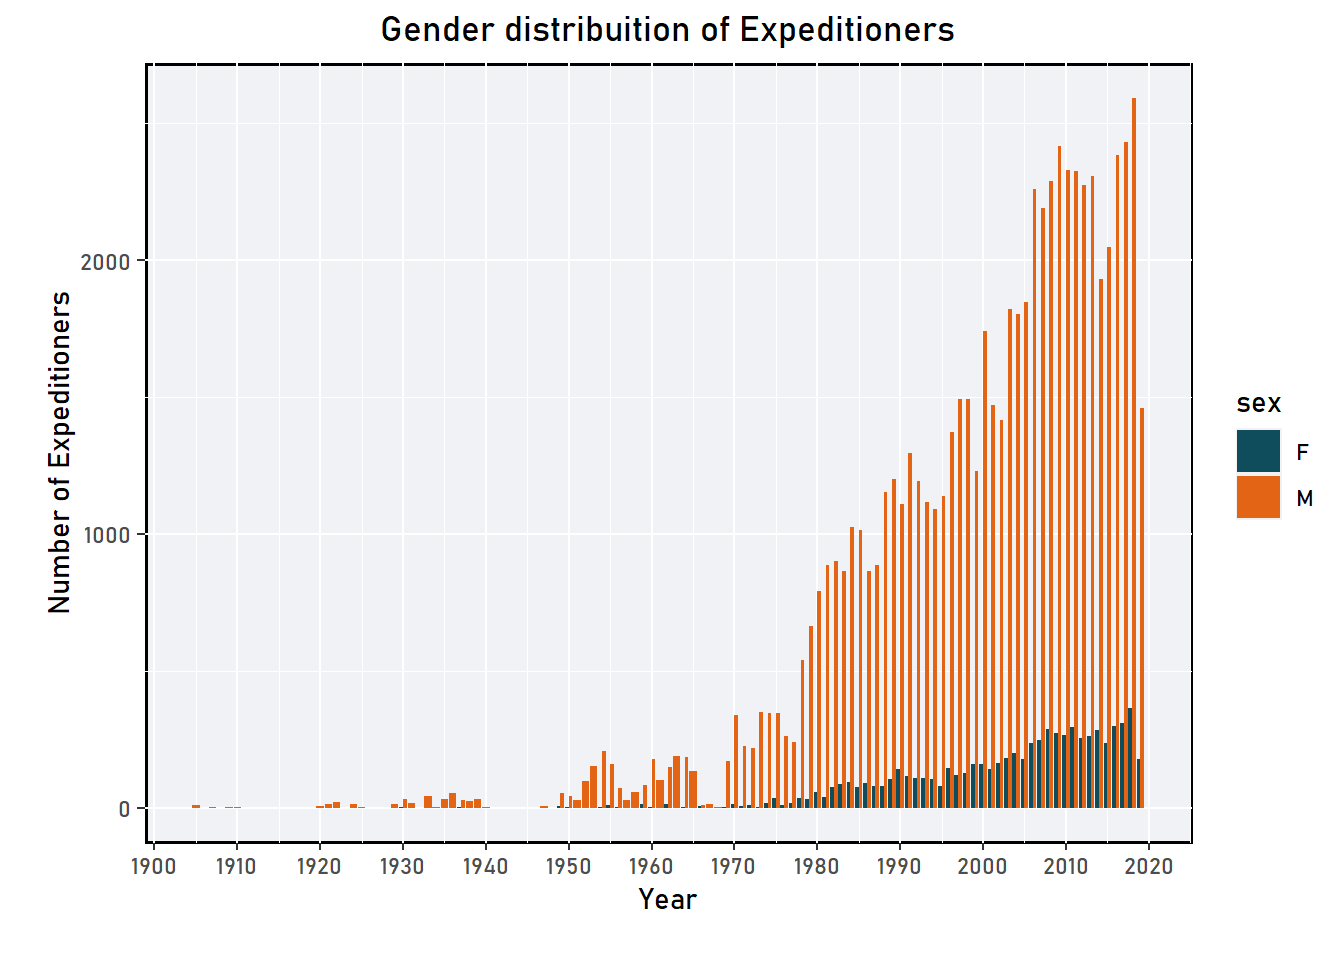 The figure shows the gender distribution of the expeditioners over the years.The number of women joining expeditions has been on the rise.